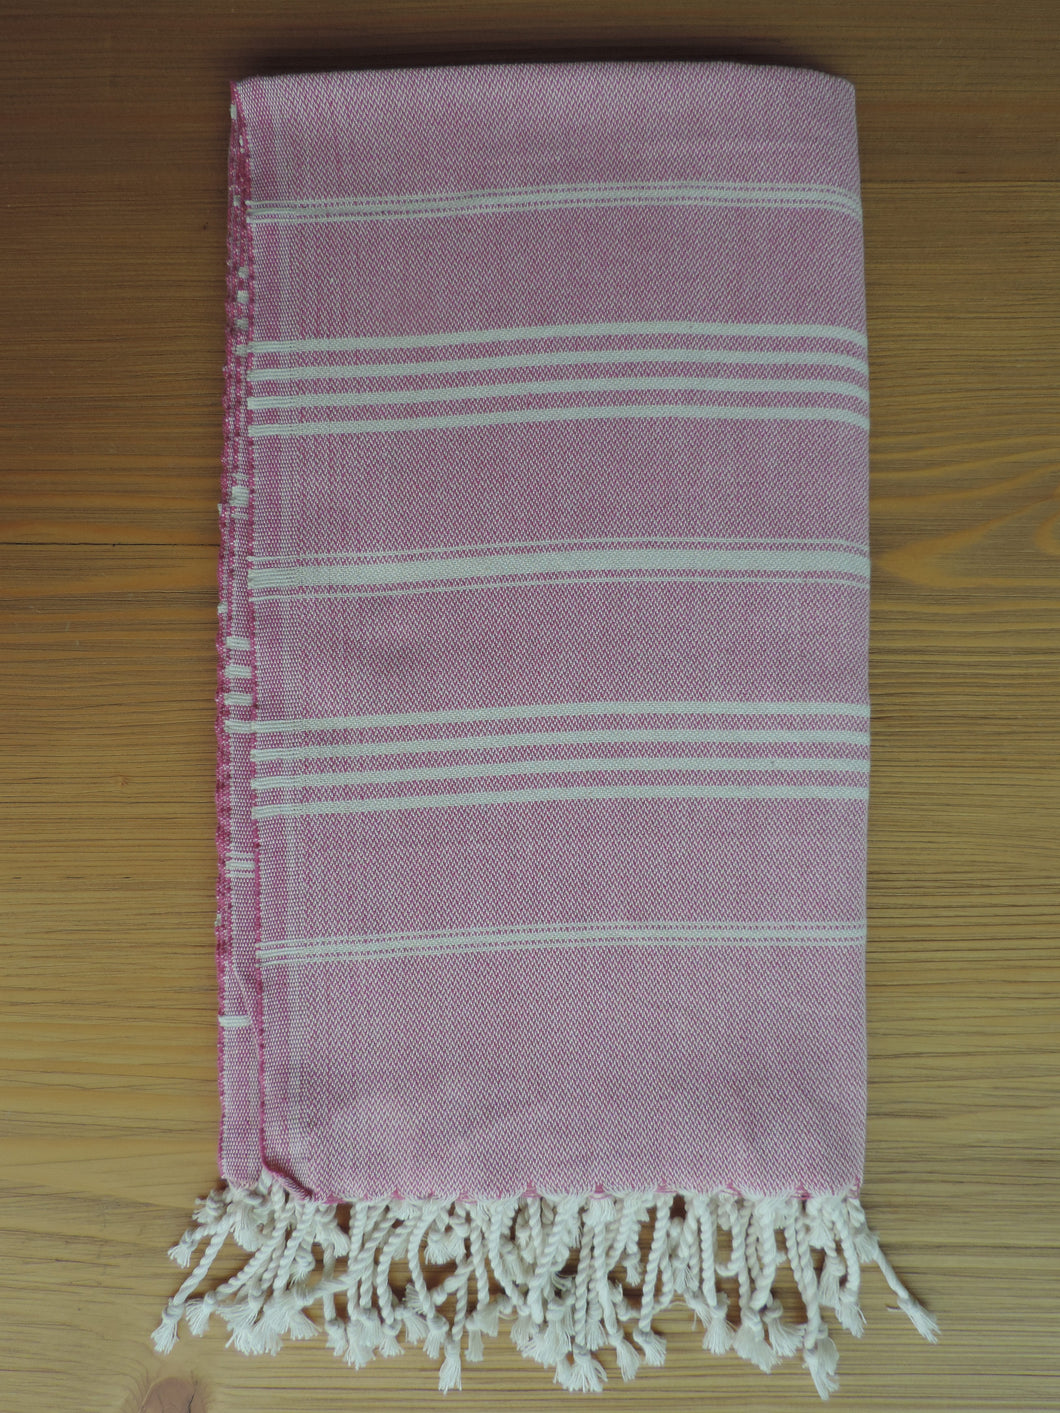 Personalized Beach Towel Throw Pestemal Peshtemal Fuchsia Pink handmade in organic turkish cotton with striped and bordered with tassels